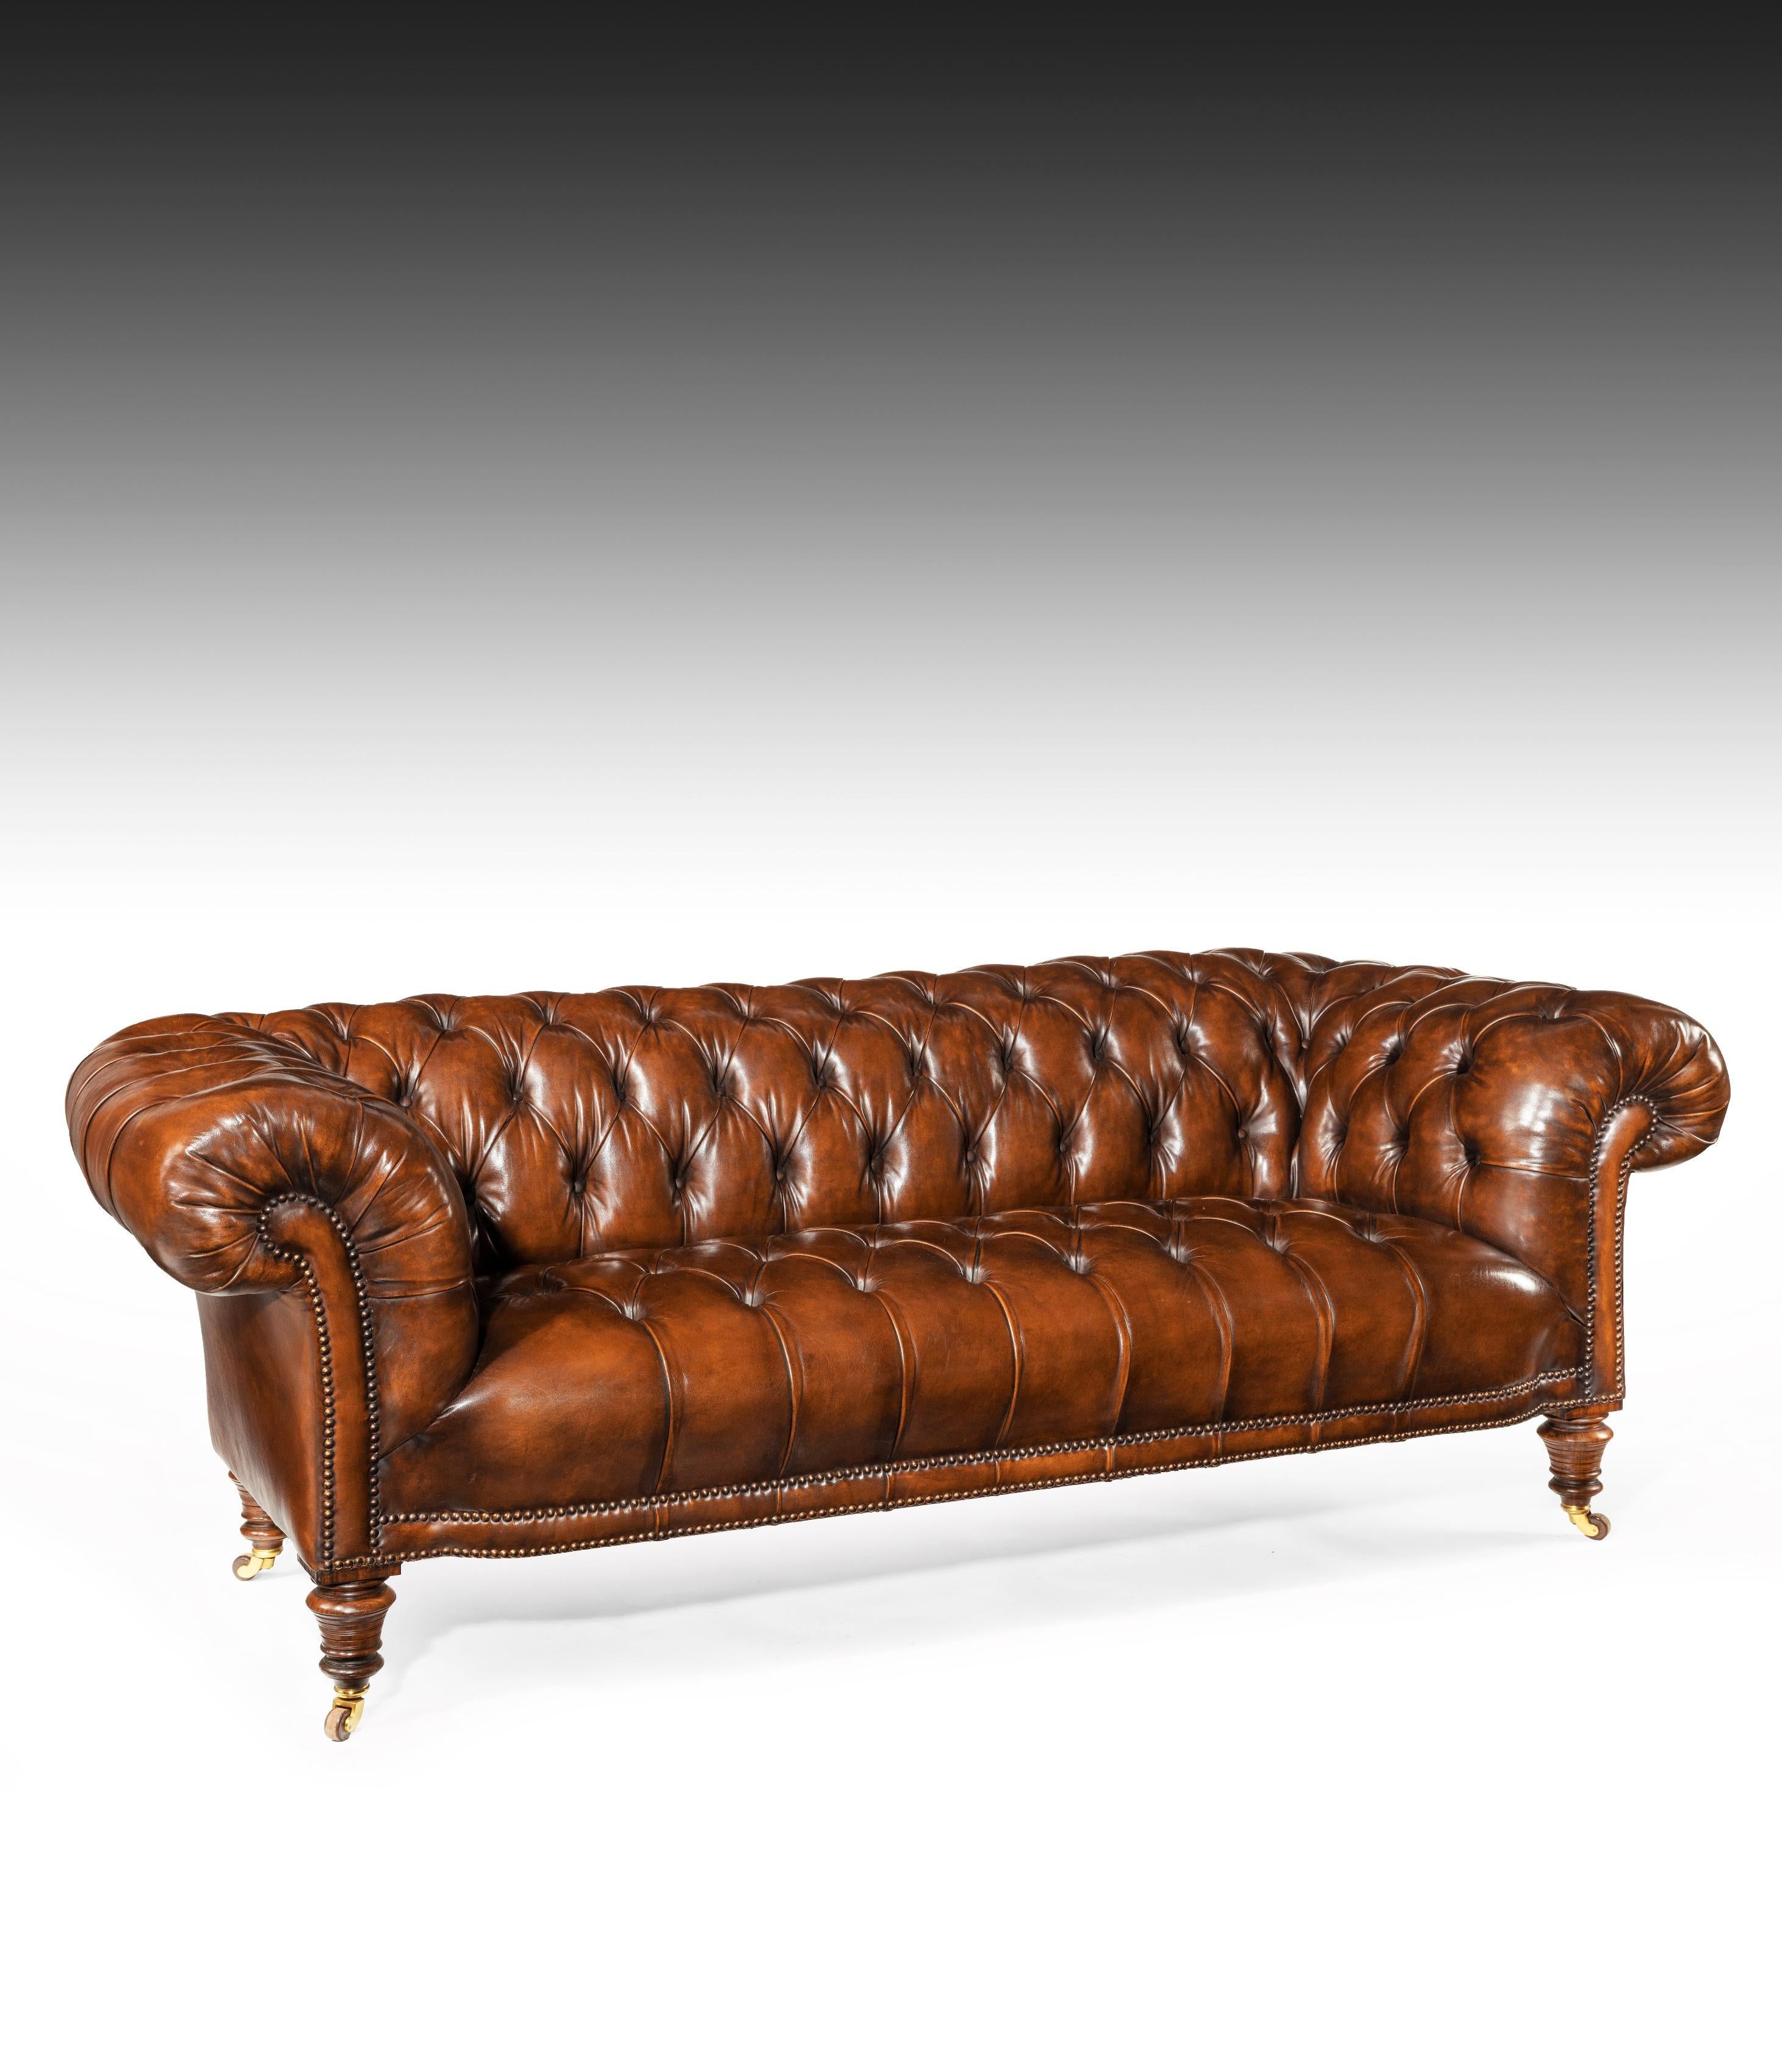 19th Century Gillows Figured Walnut Leather Chesterfield Sofa 5